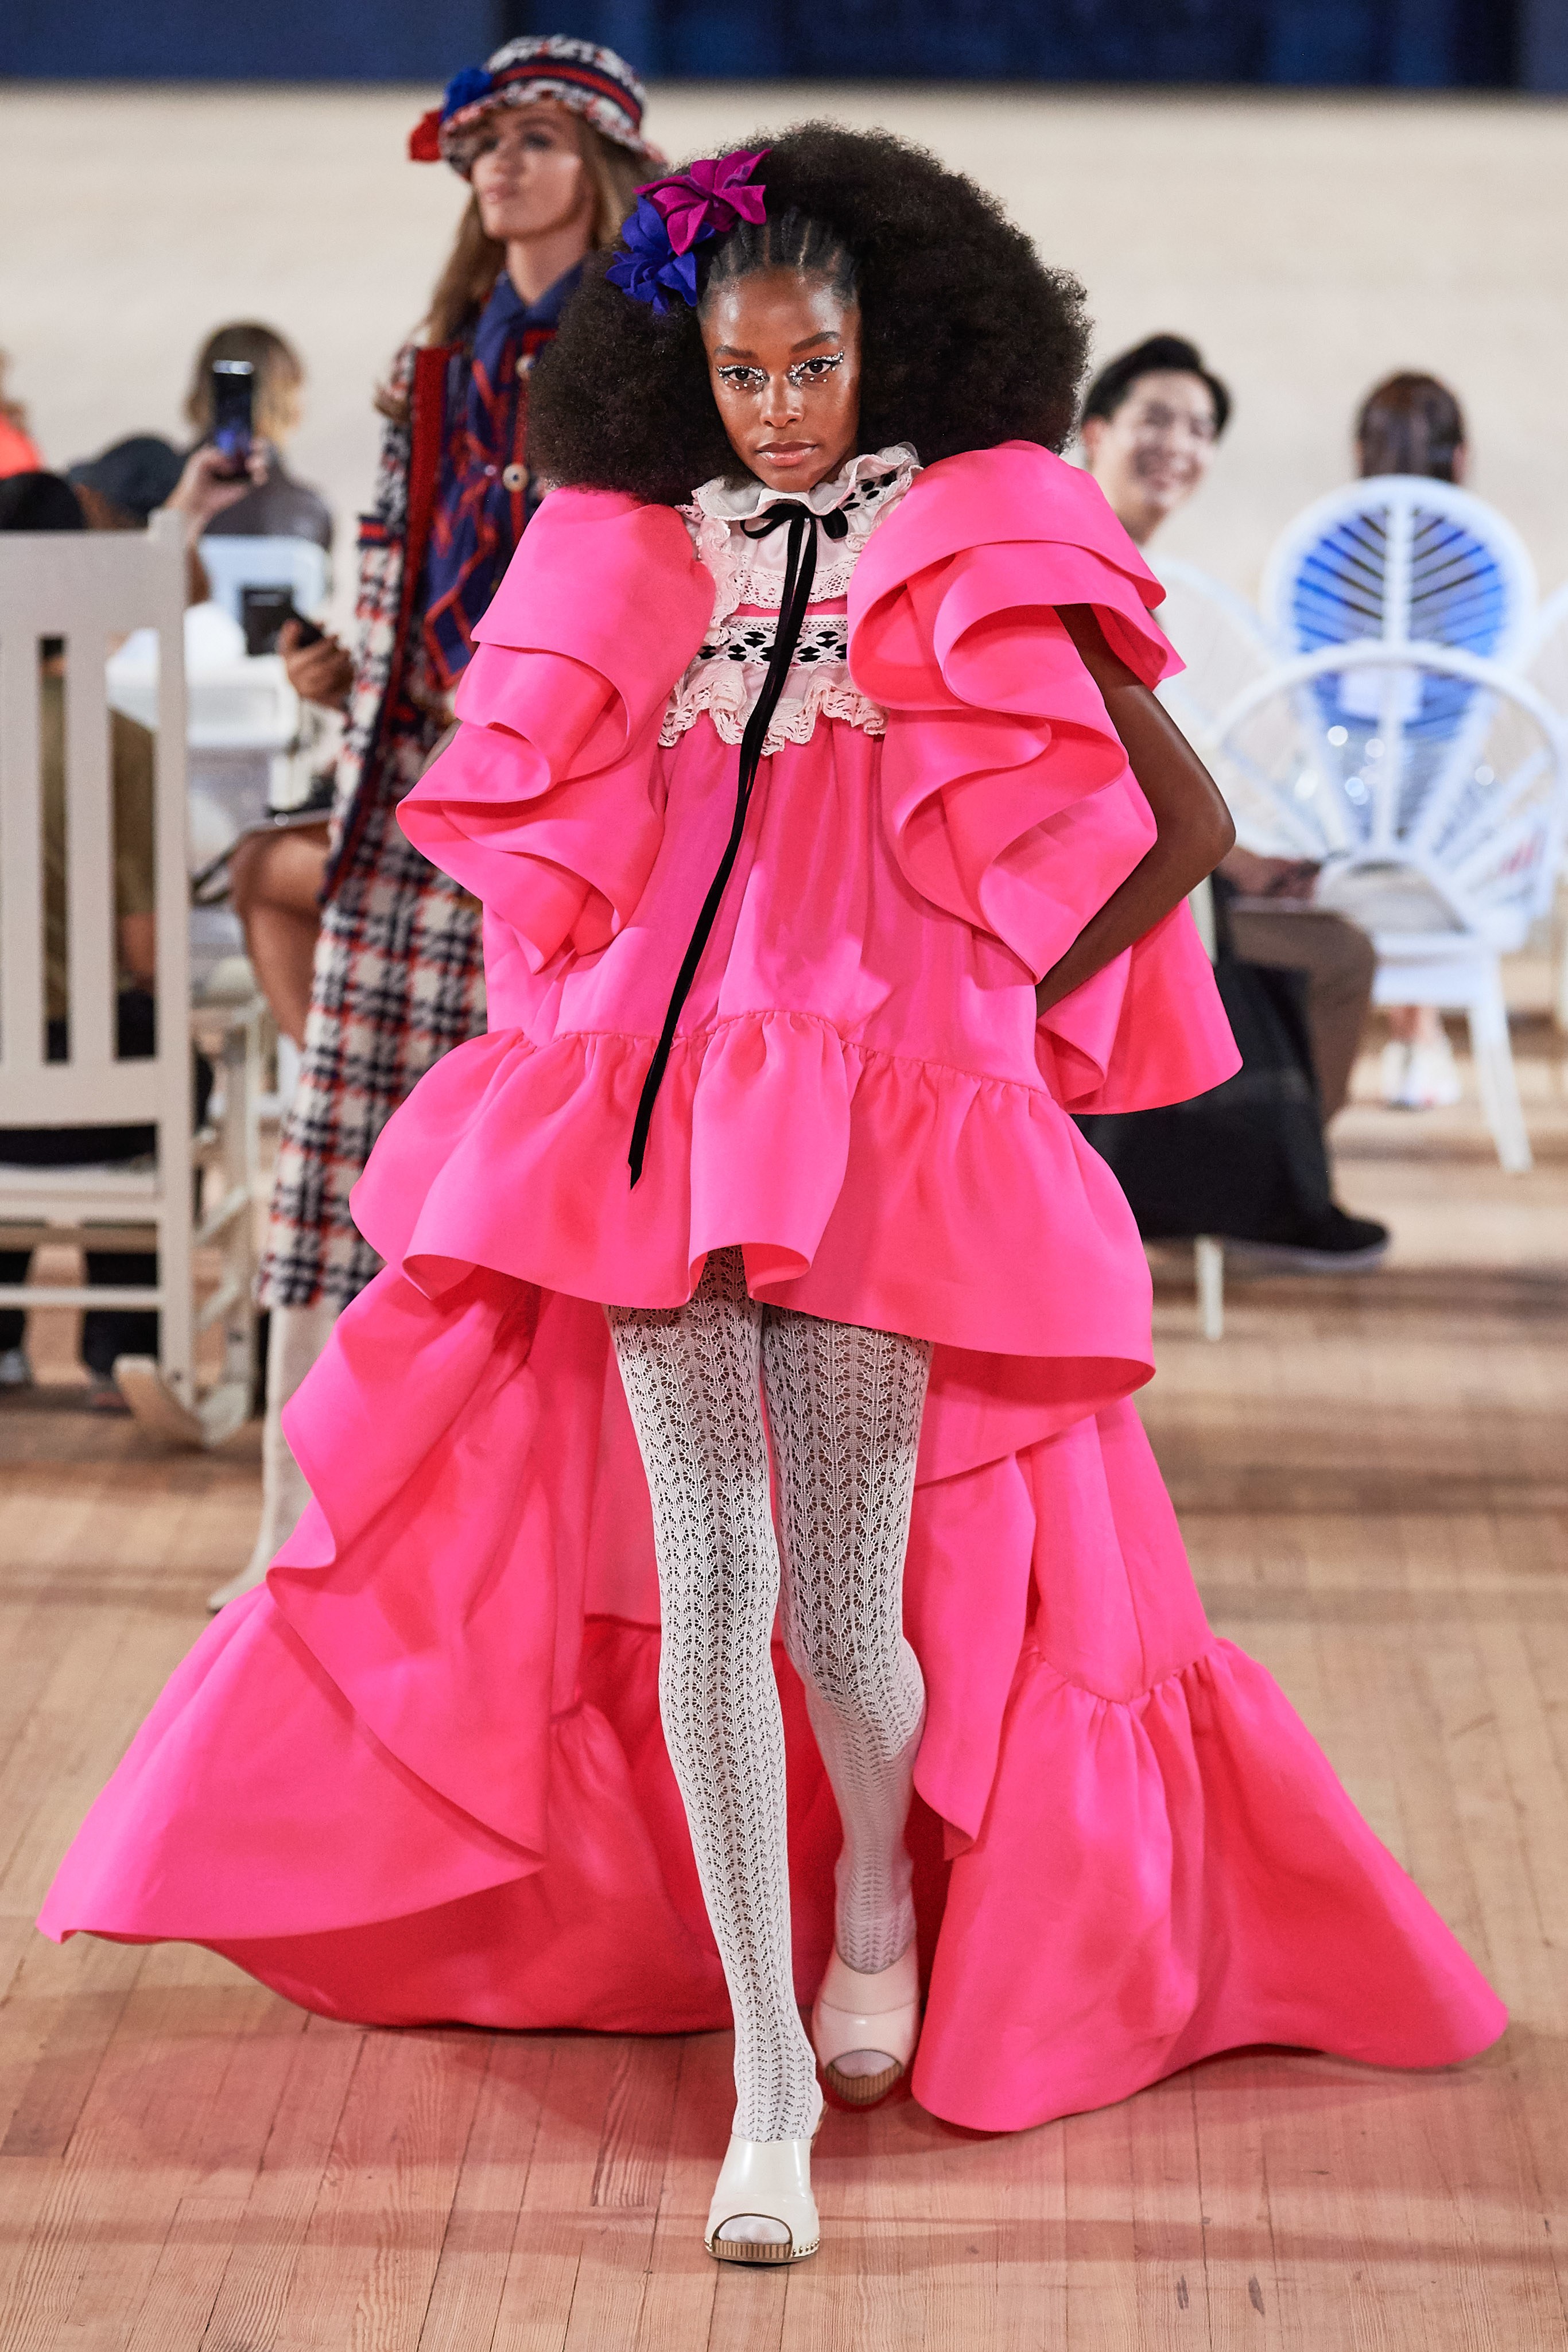 marc-jacobs-nyfw-new-york-fashion-week-spring-summer-2020-ss20-style-rave